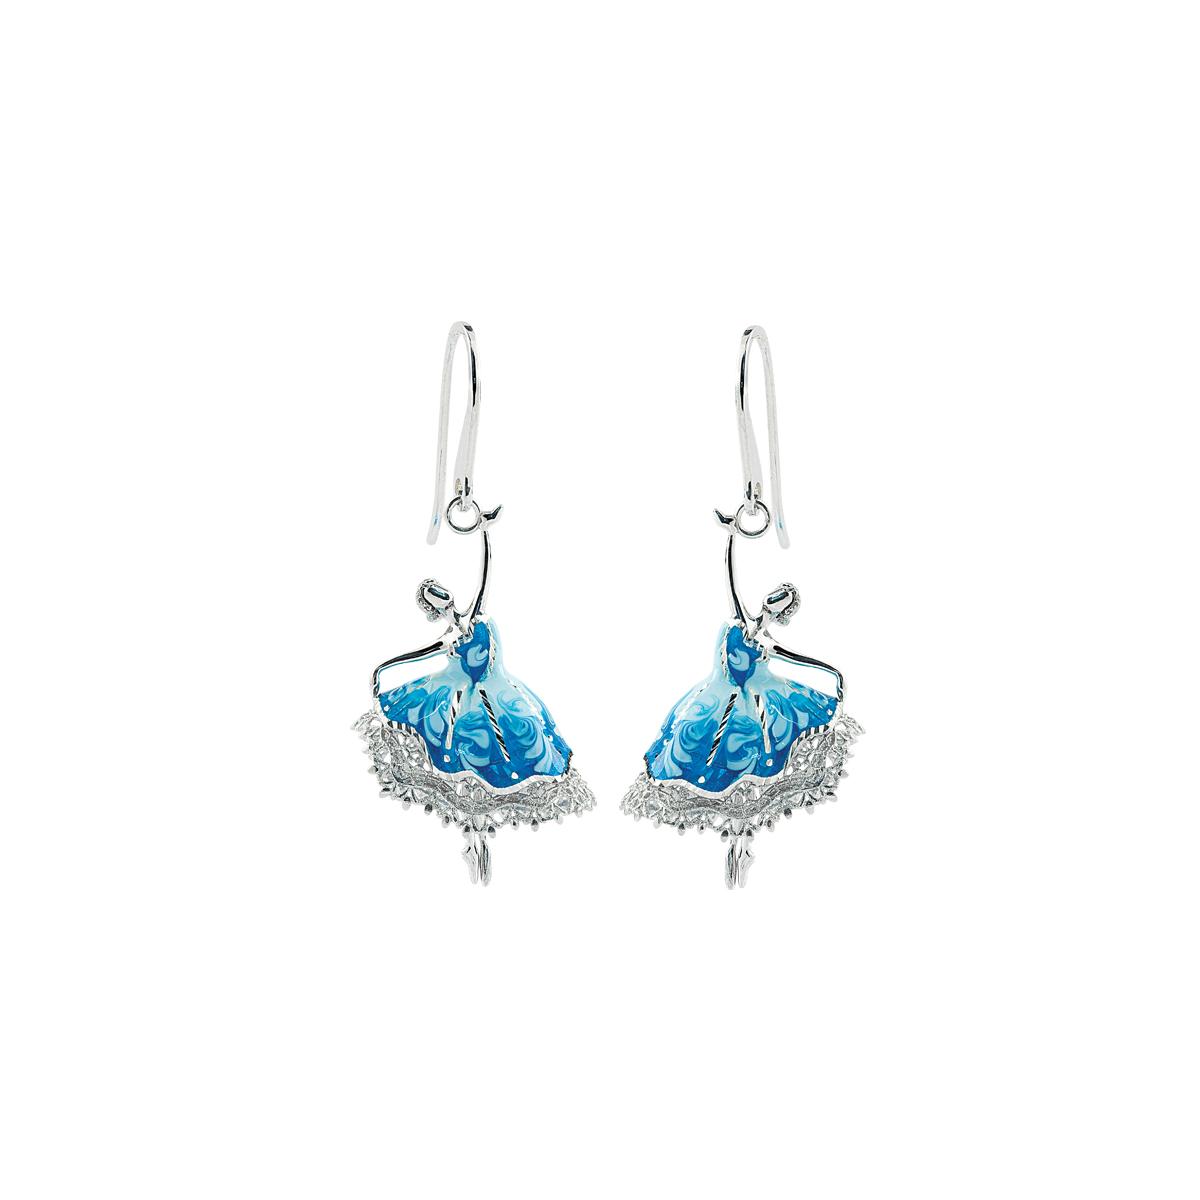 Ballerina earrings in 925 silver, rhodium-plated, with blue hand-made enamel - ZOR1117-MB